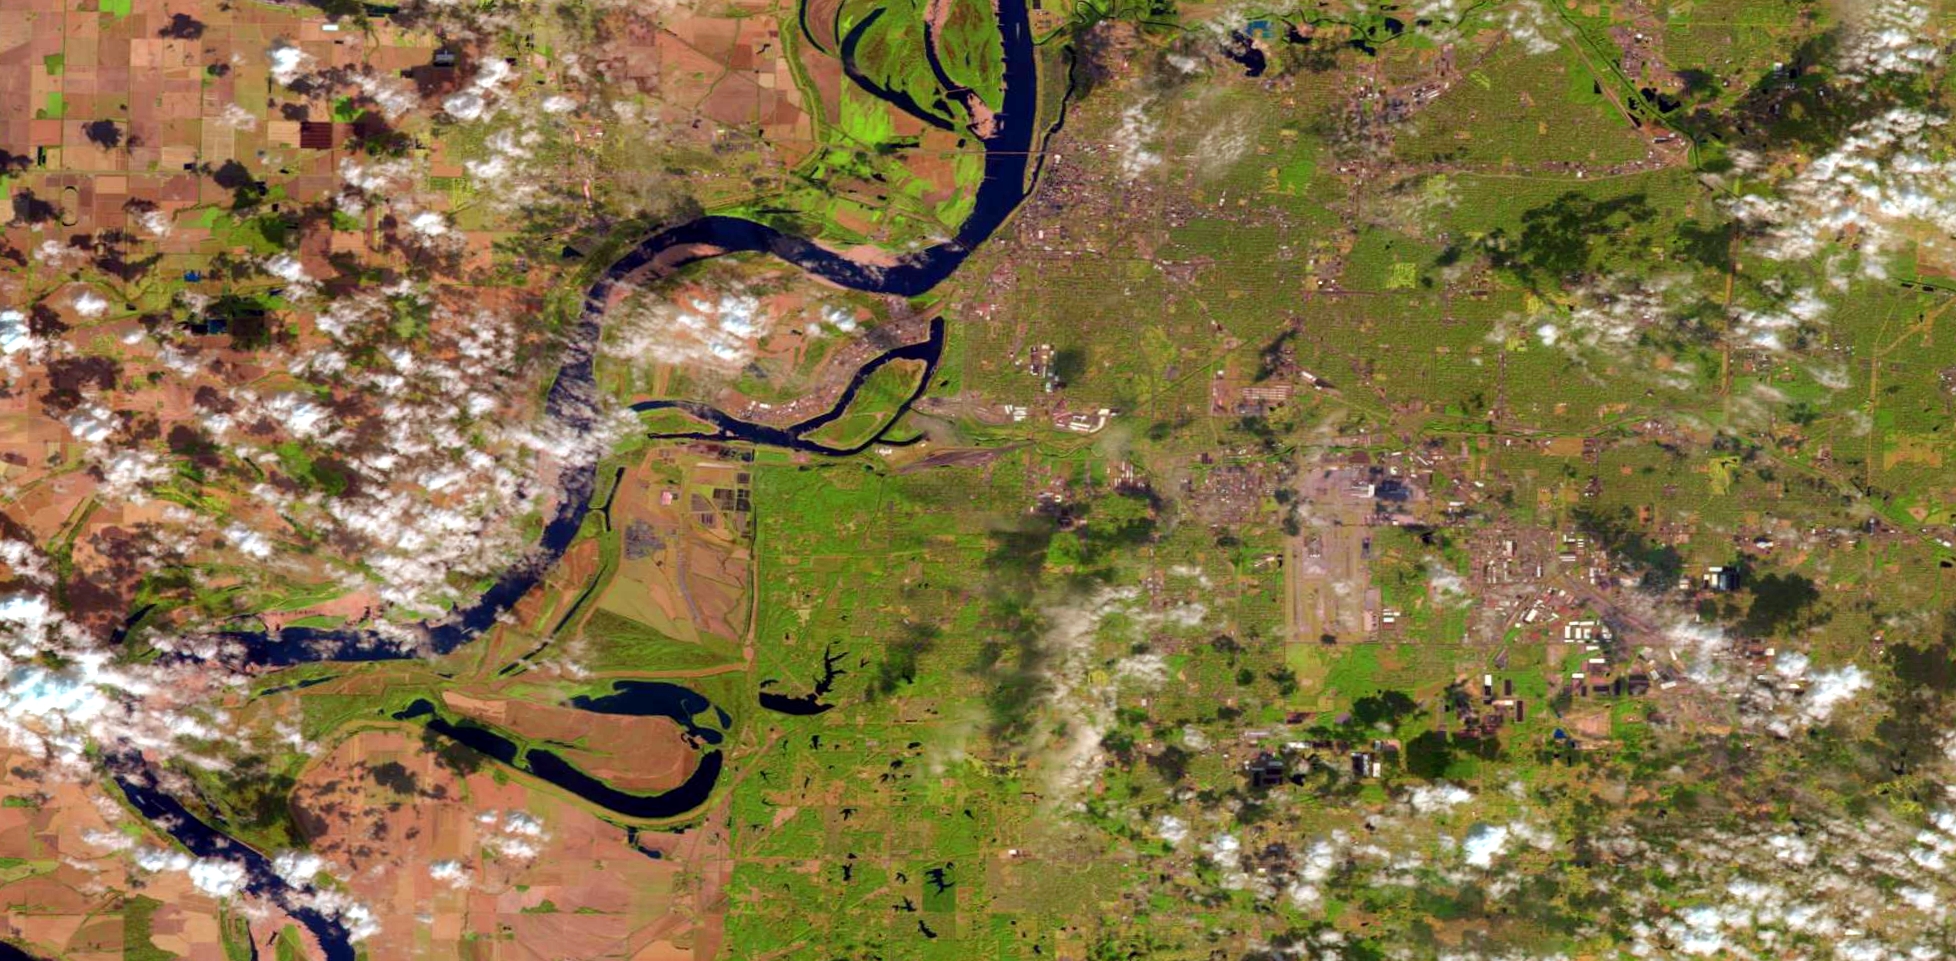 The Sparta-Memphis Sand Aquifer lies beneath Mississippi and Tennessee, land east of the Mississippi River that is shown in this Landsat image. Mississippi's lawsuit against Tennessee is the first lawsuit over a shared aquifer to be heard by the U.S. Supreme Court.